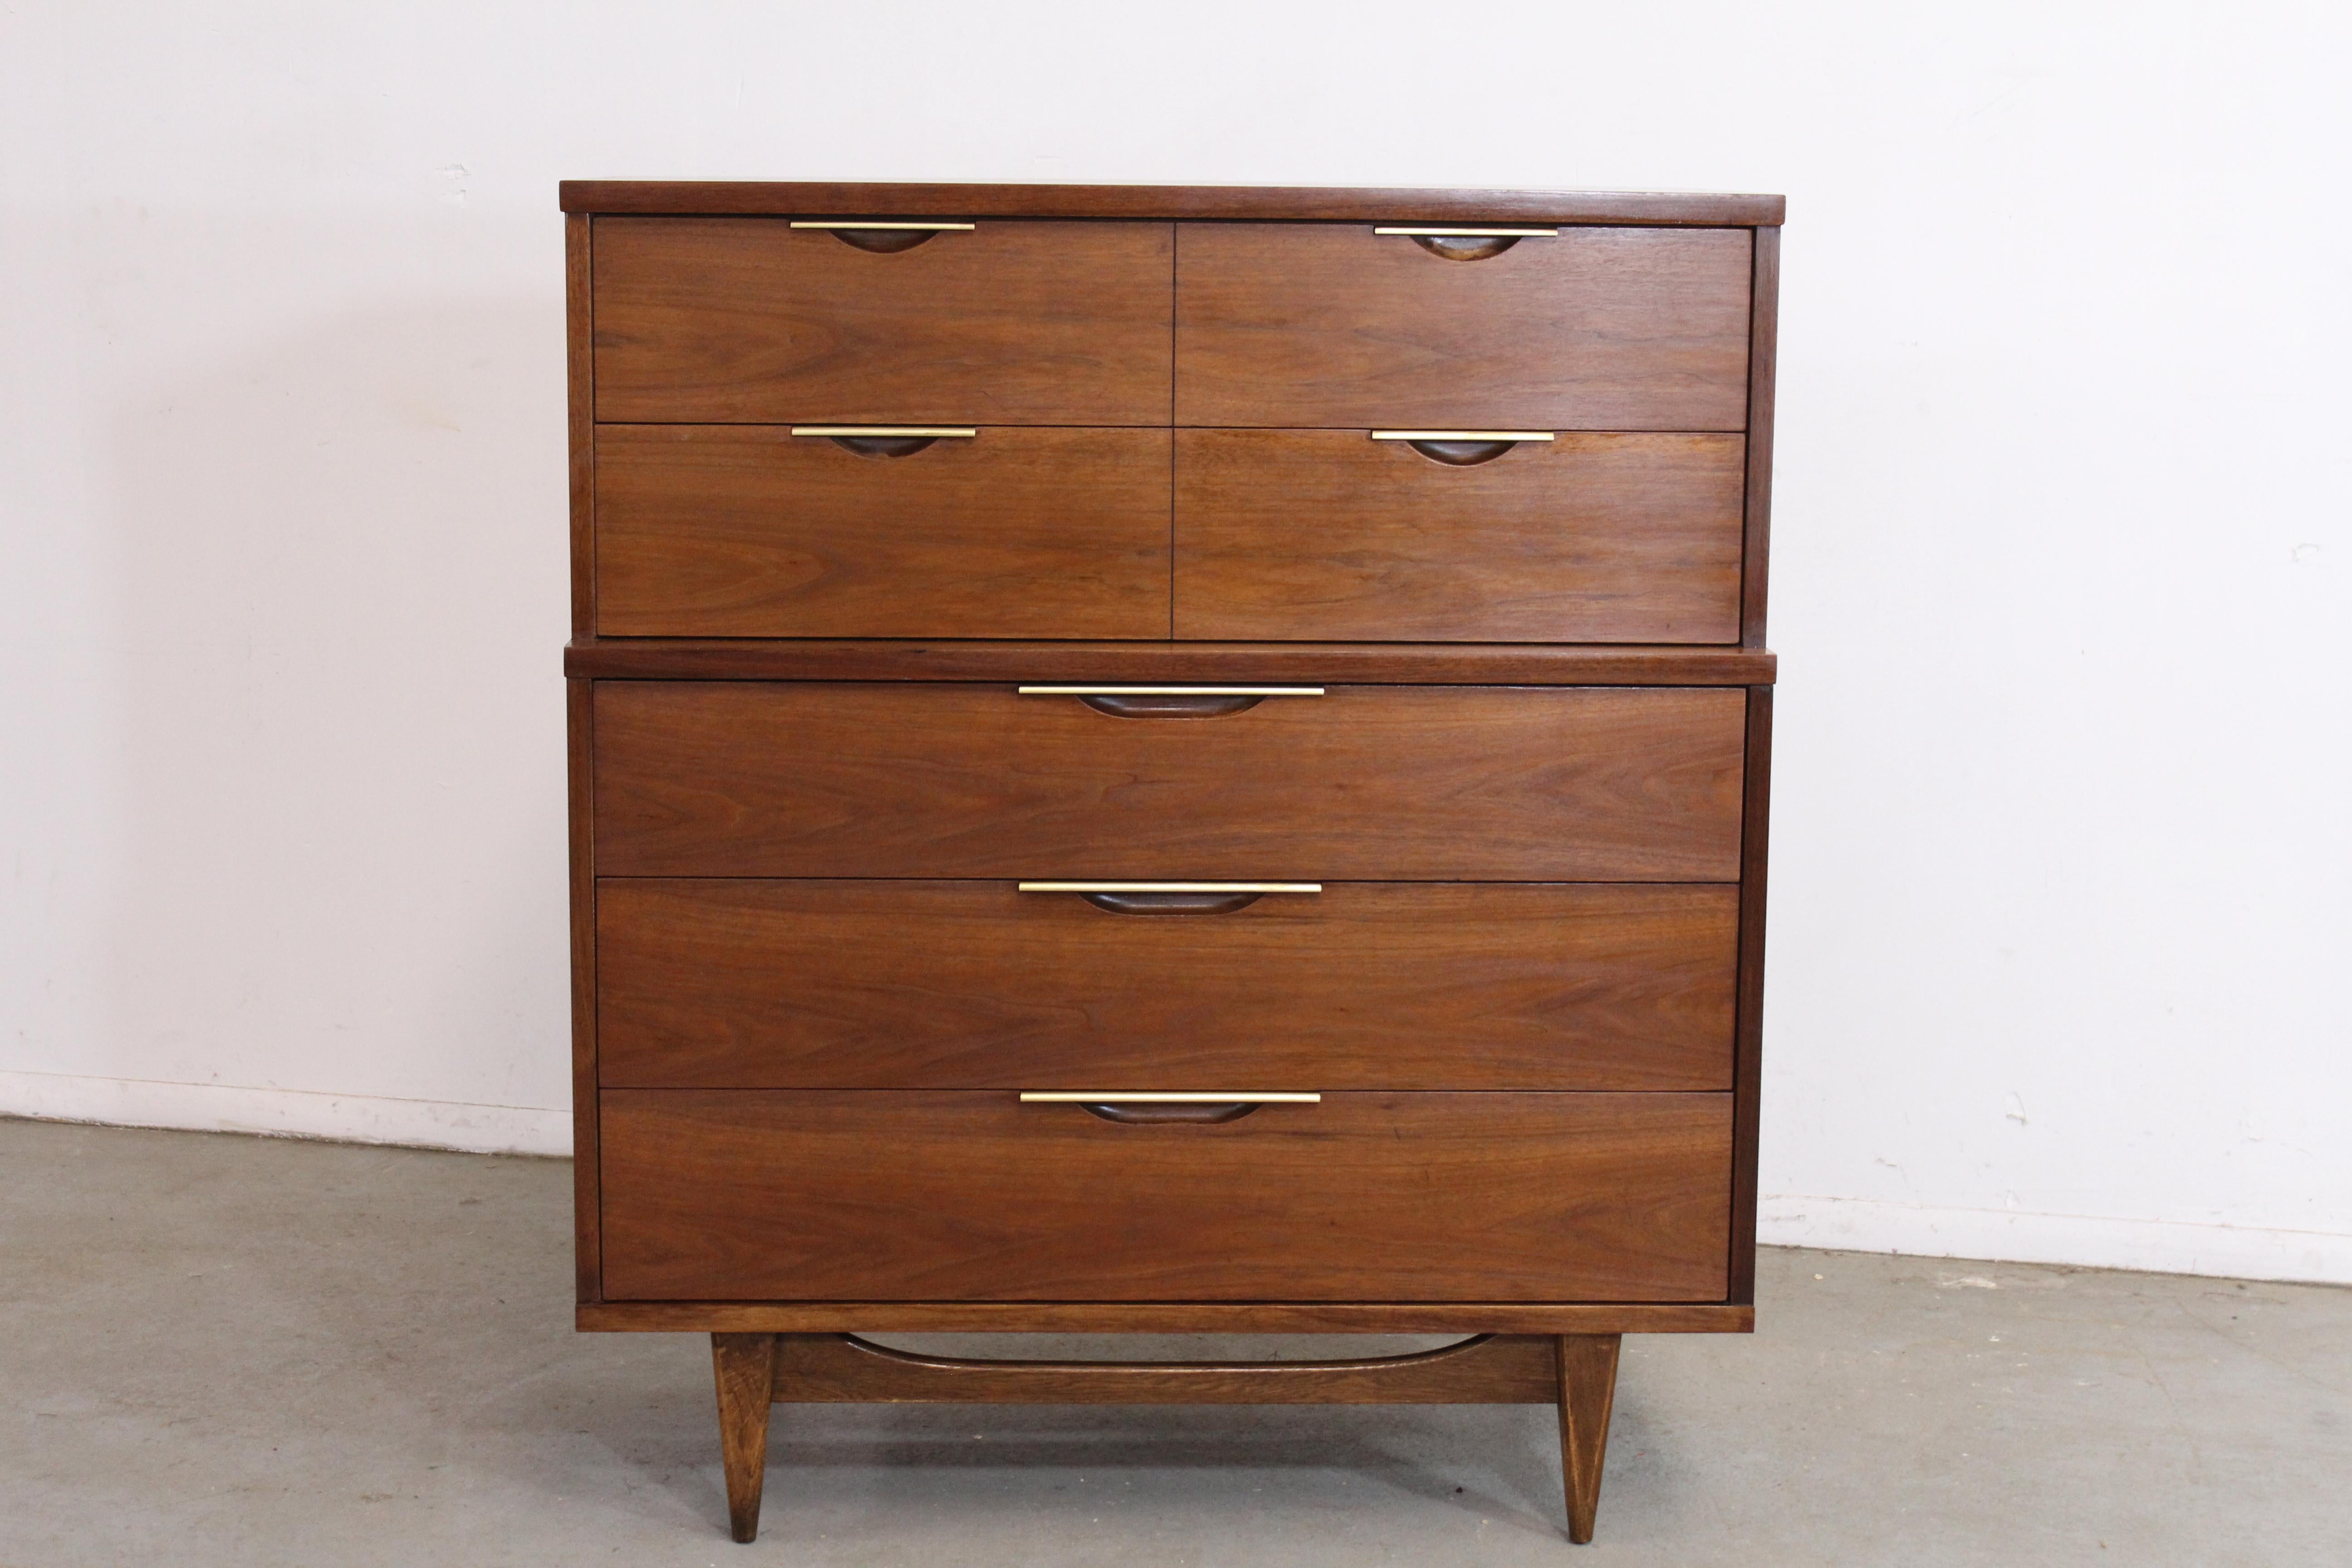 Mid-Century Modern Kent Coffey tableau walnut tall chest on stretcher base.

Offered is a beautiful Mid-Century Modern Kent Coffey tableau walnut tall chest on stretcher base. It has an spectacular stretcher base. In very good condition and